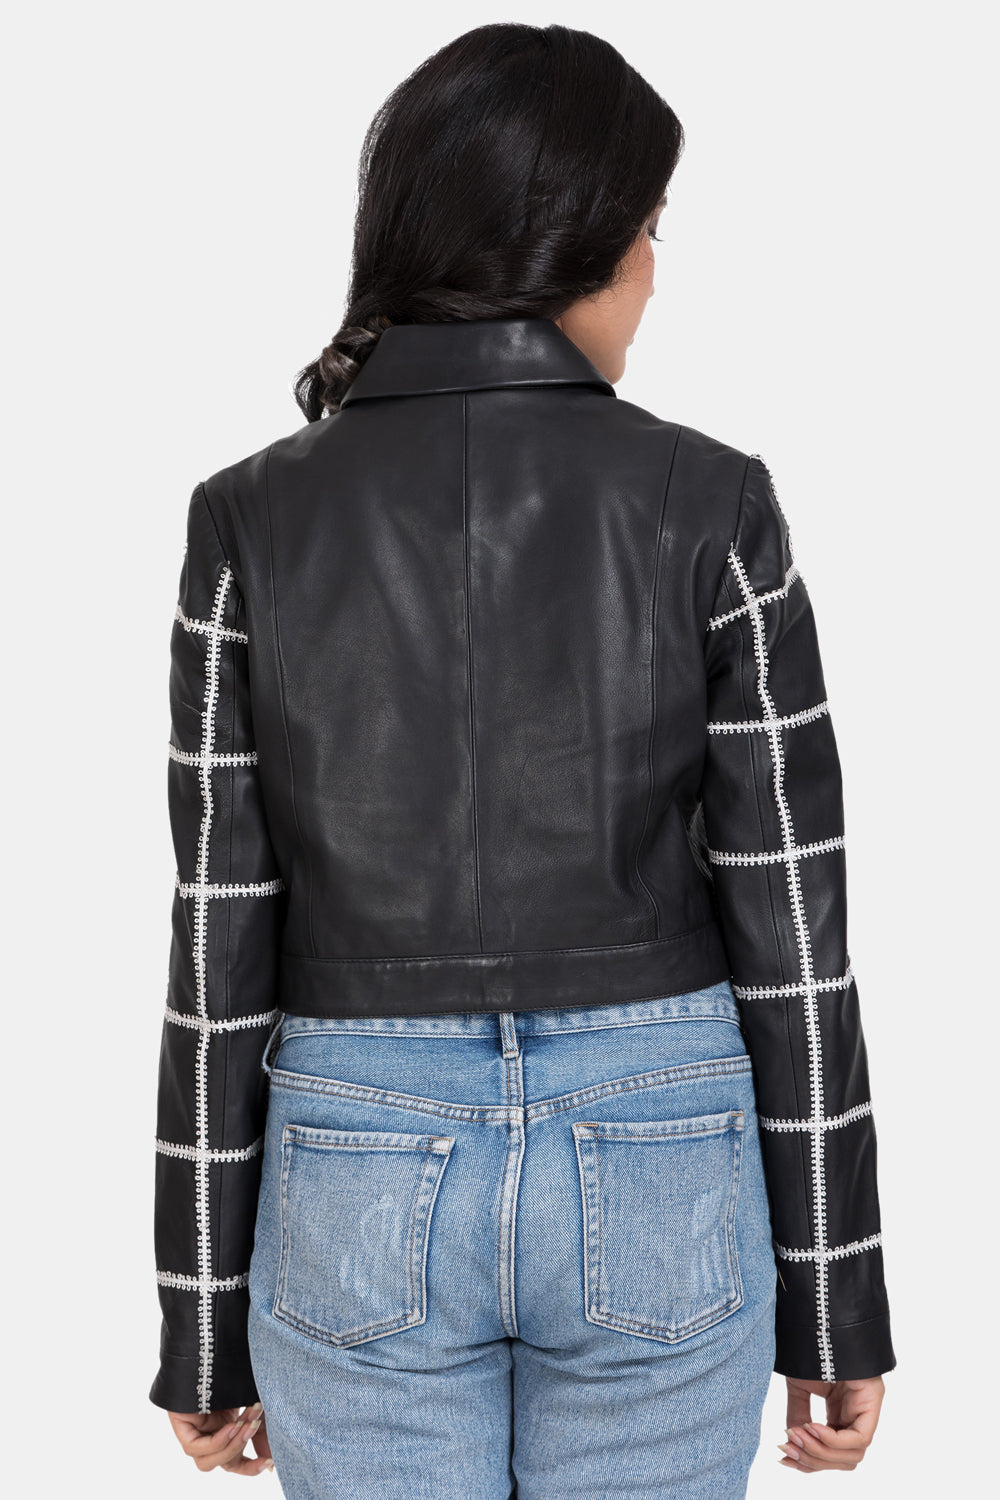 Justanned Lace Leather Jacket